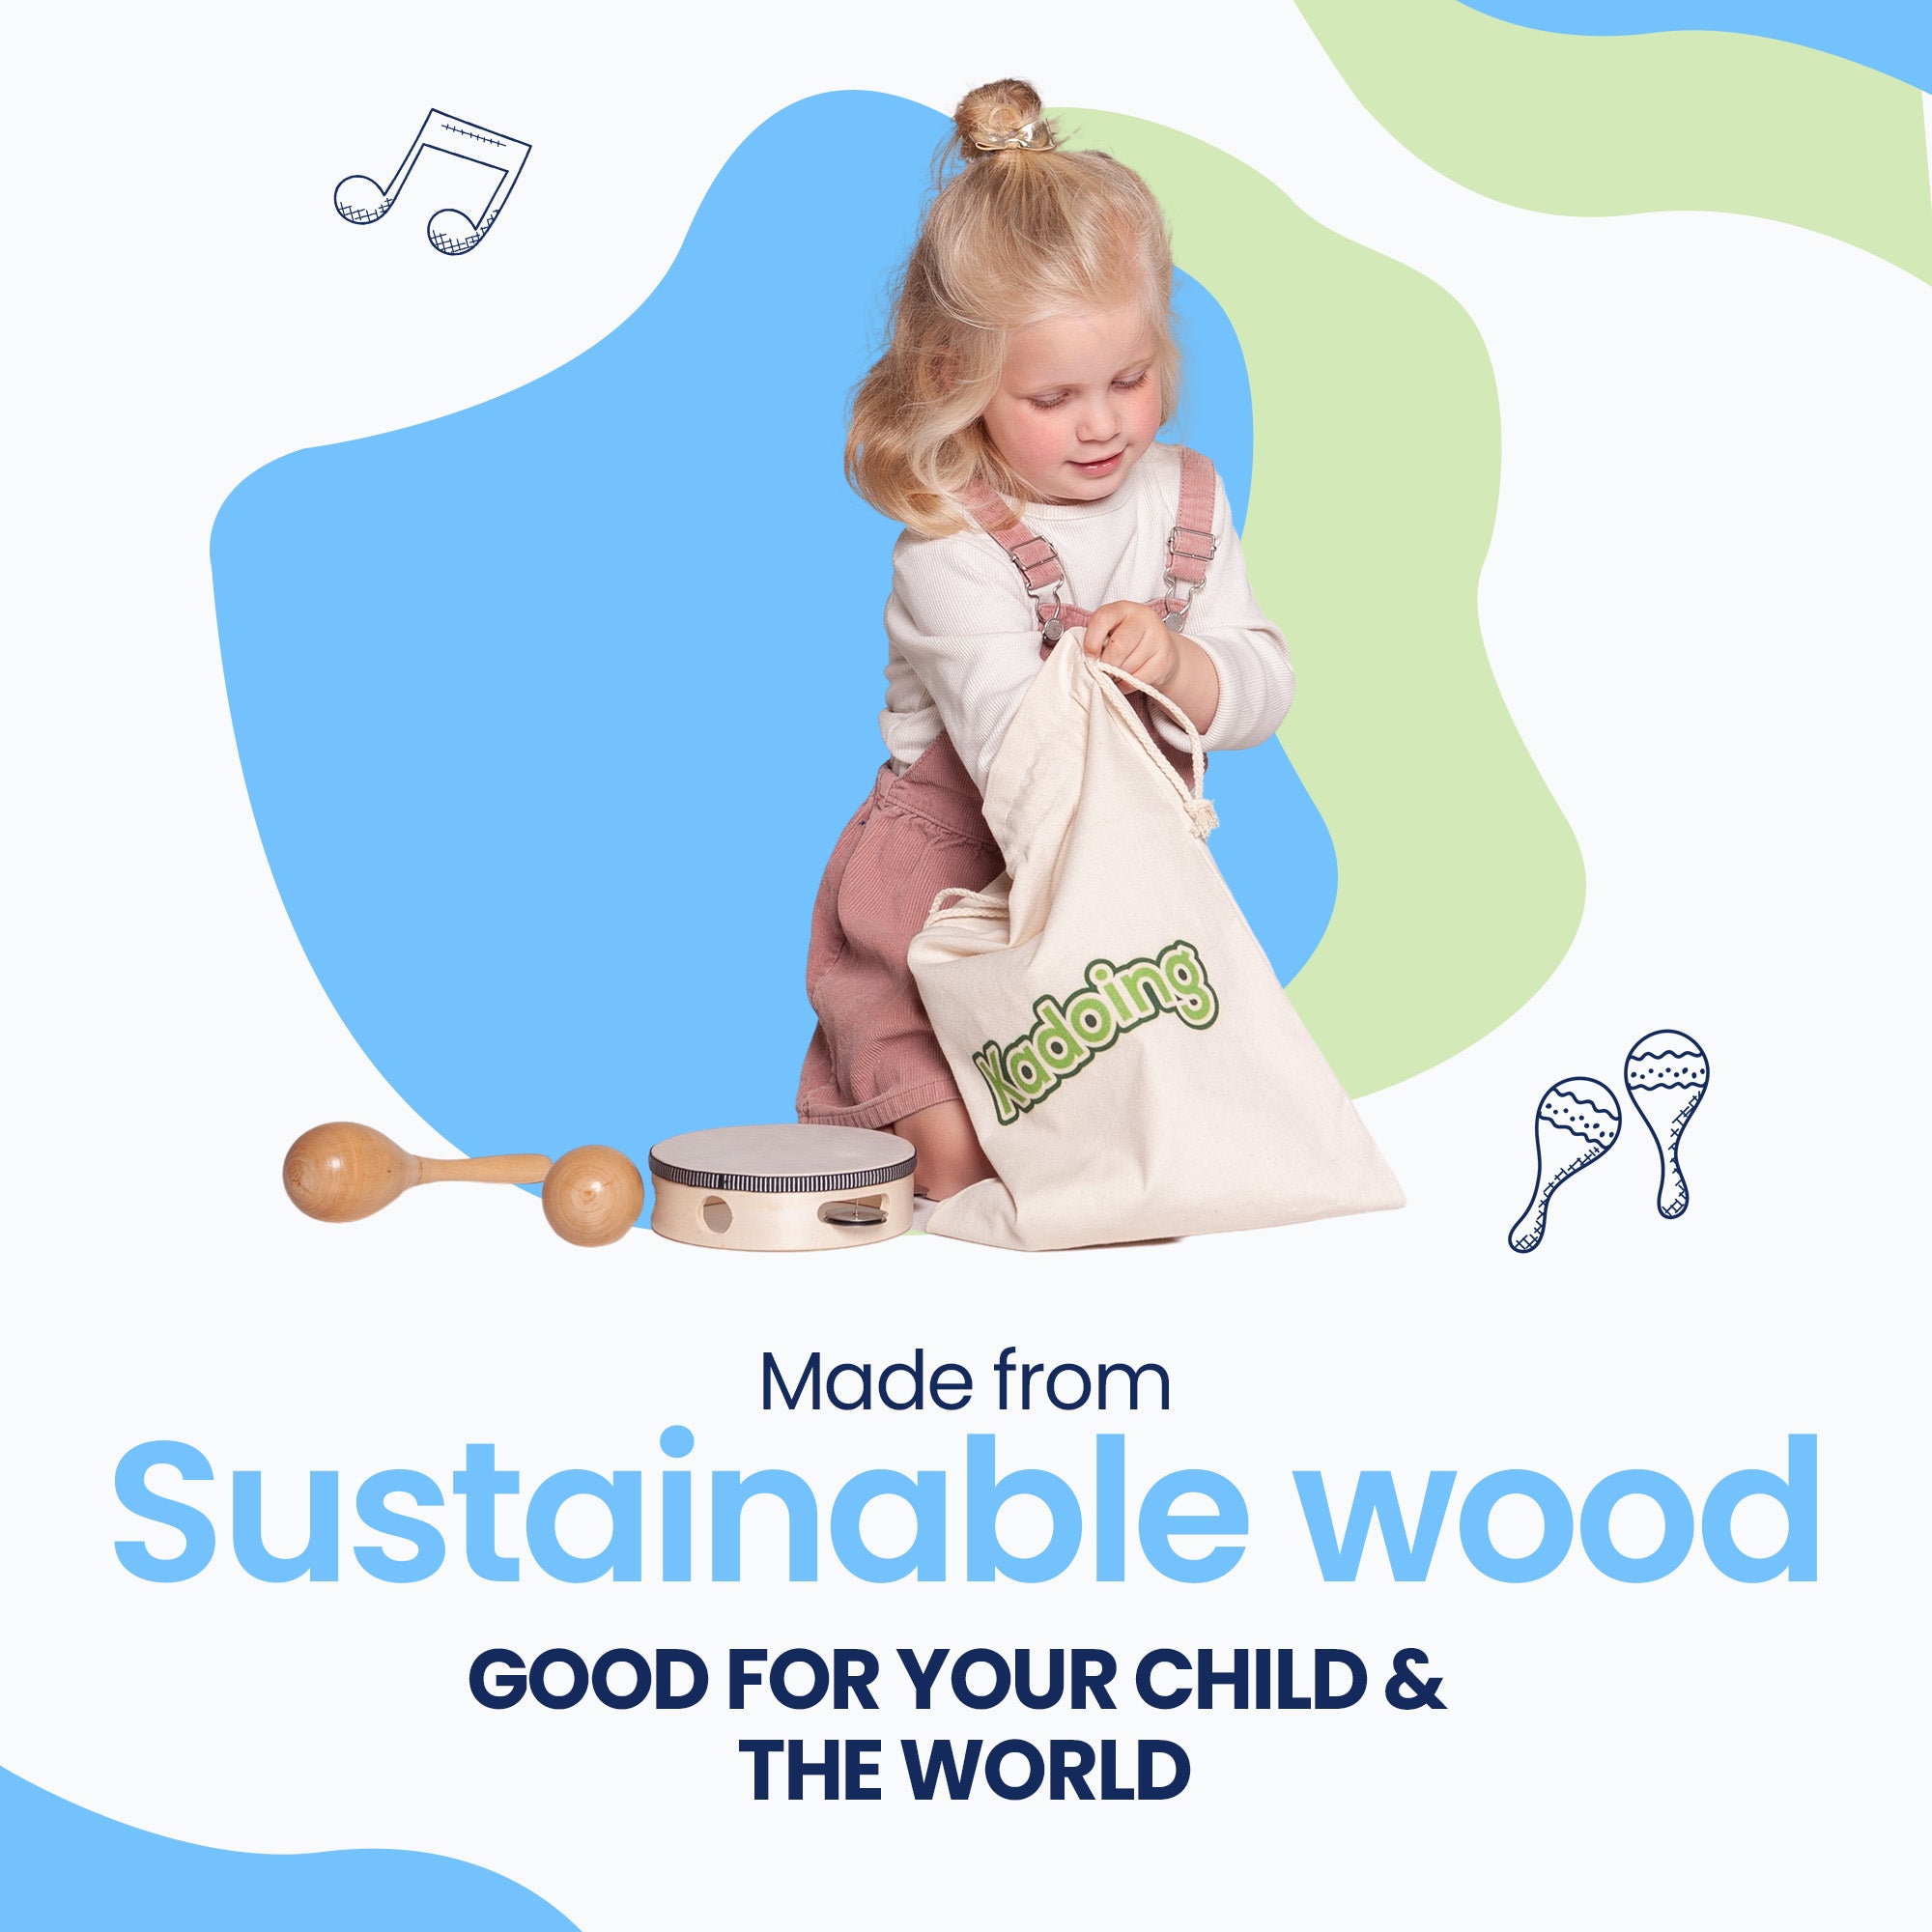 The musical instrument set is made of sustainable wood, as you would expect from Kadoing